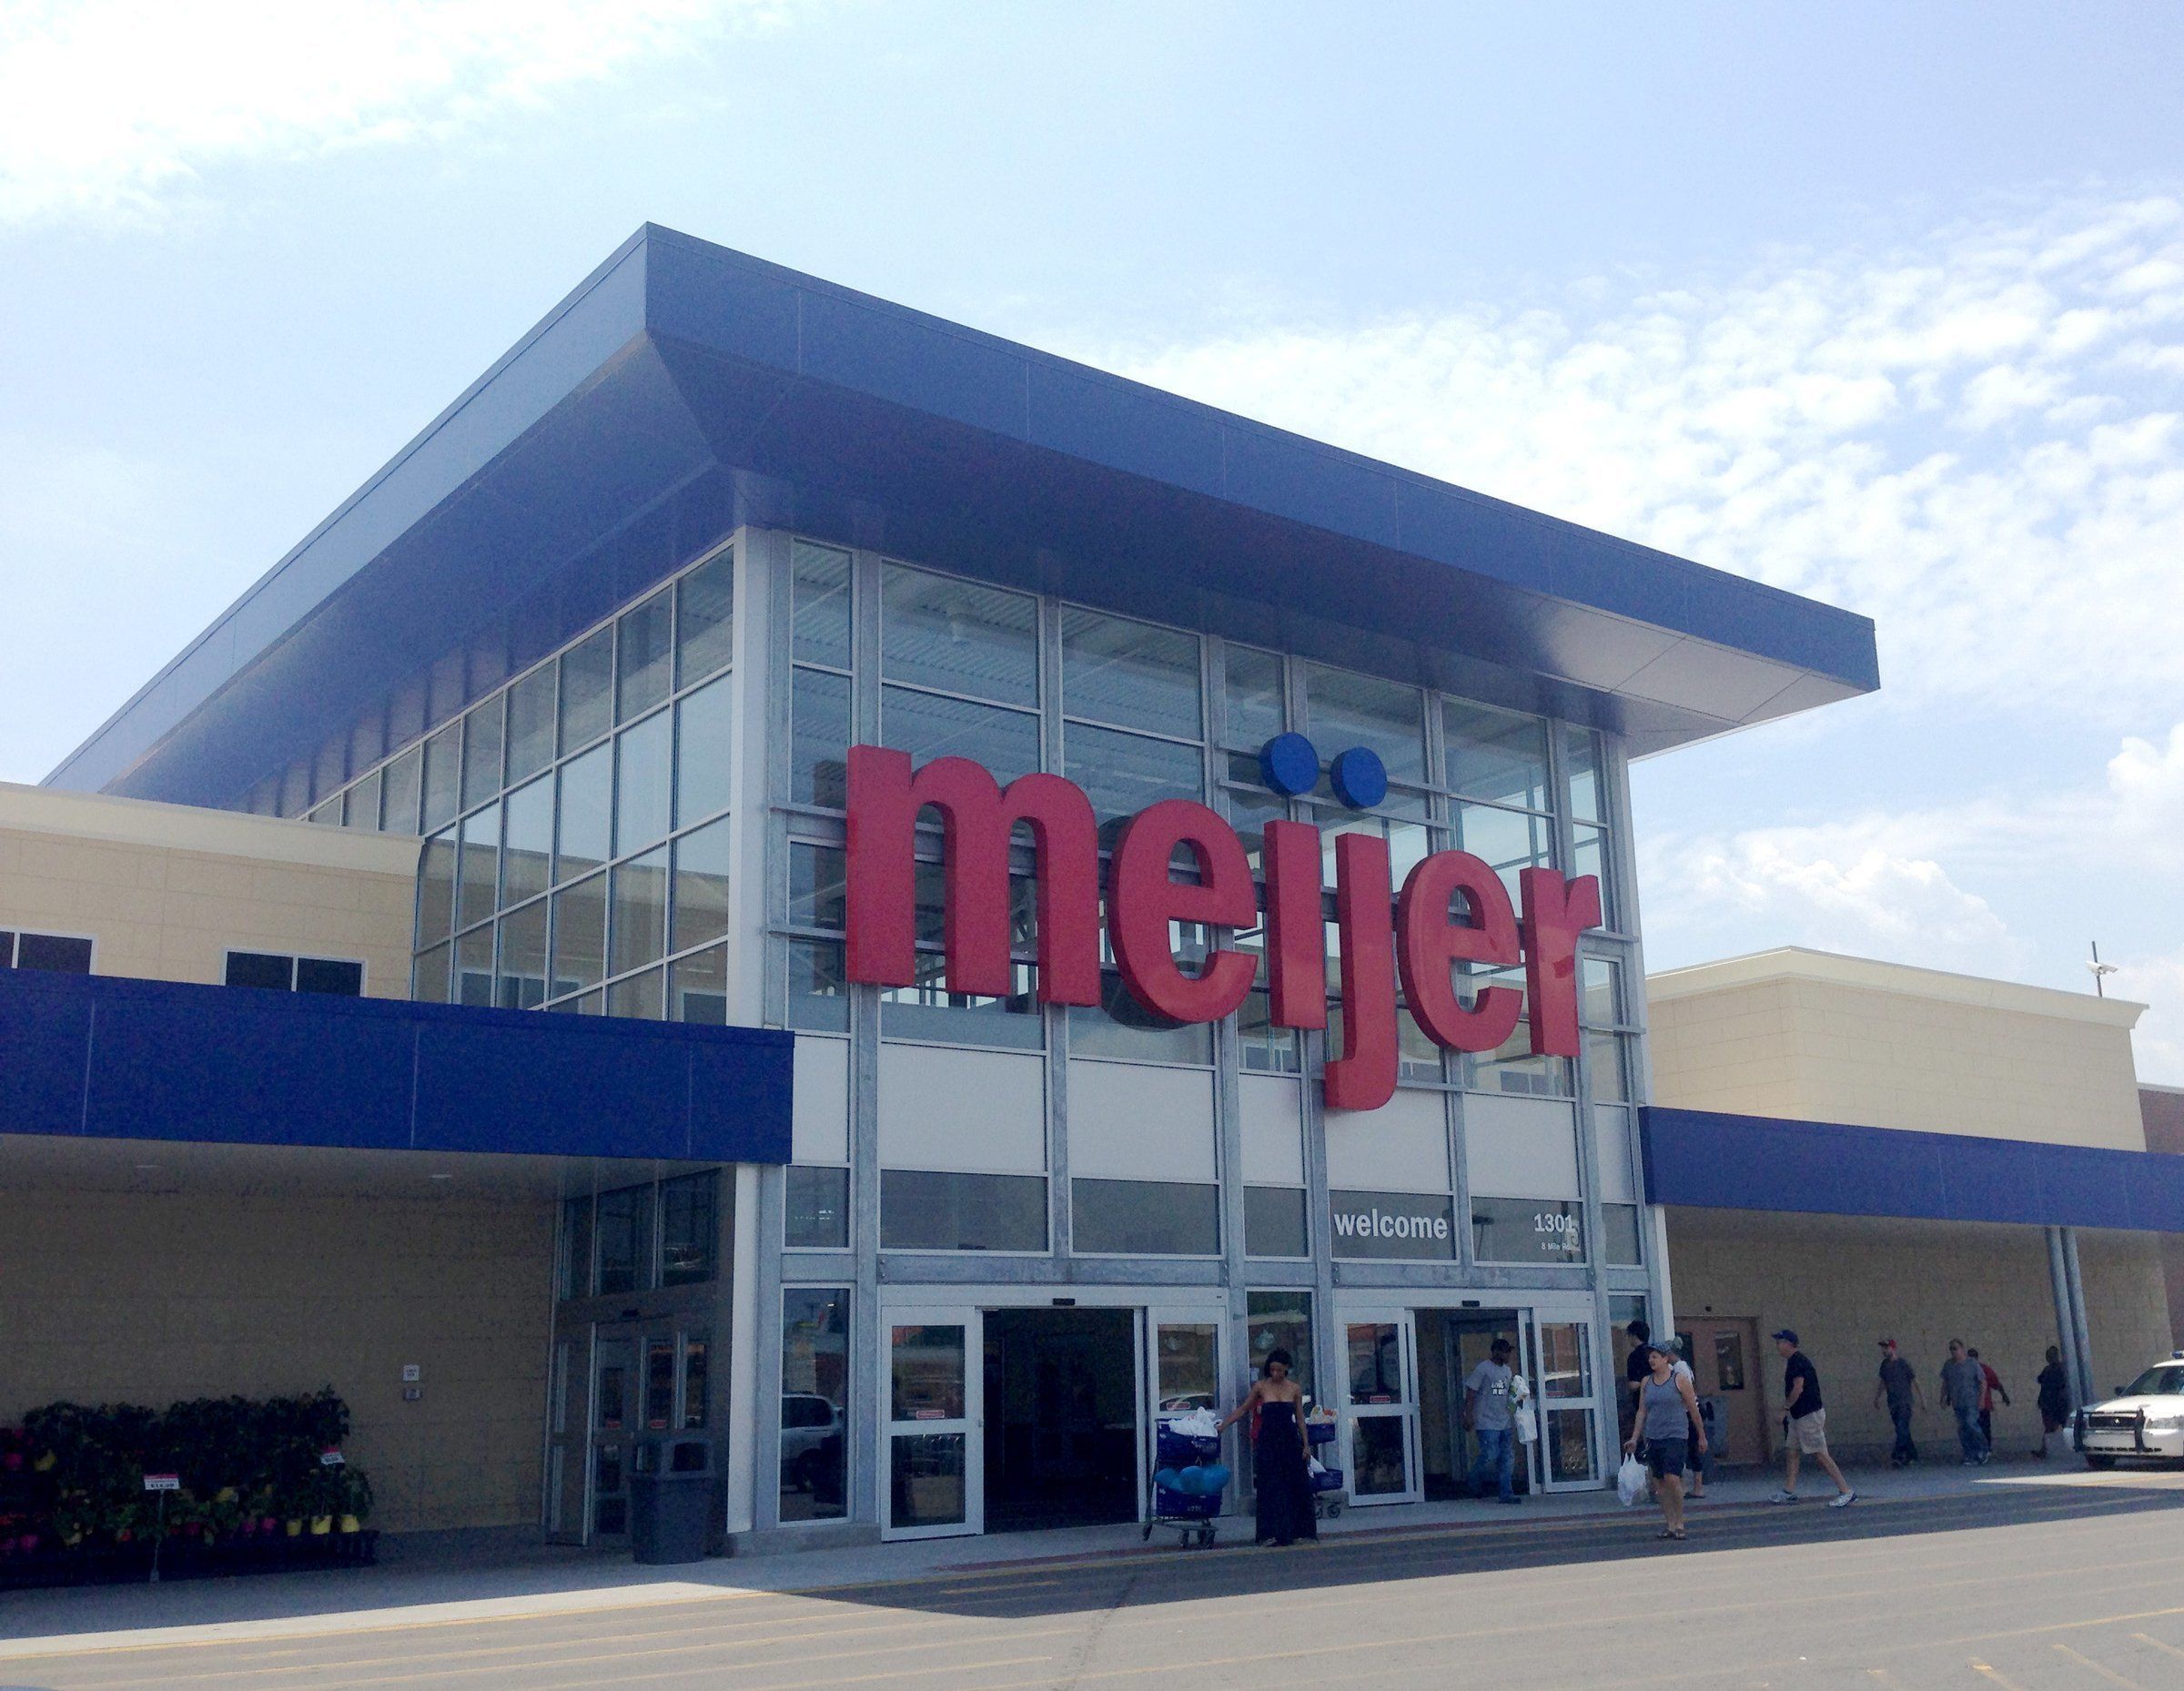 meijer to close stores at 10 p m offer shopping hours for seniors meijer to close stores at 10 p m offer shopping hours for seniors